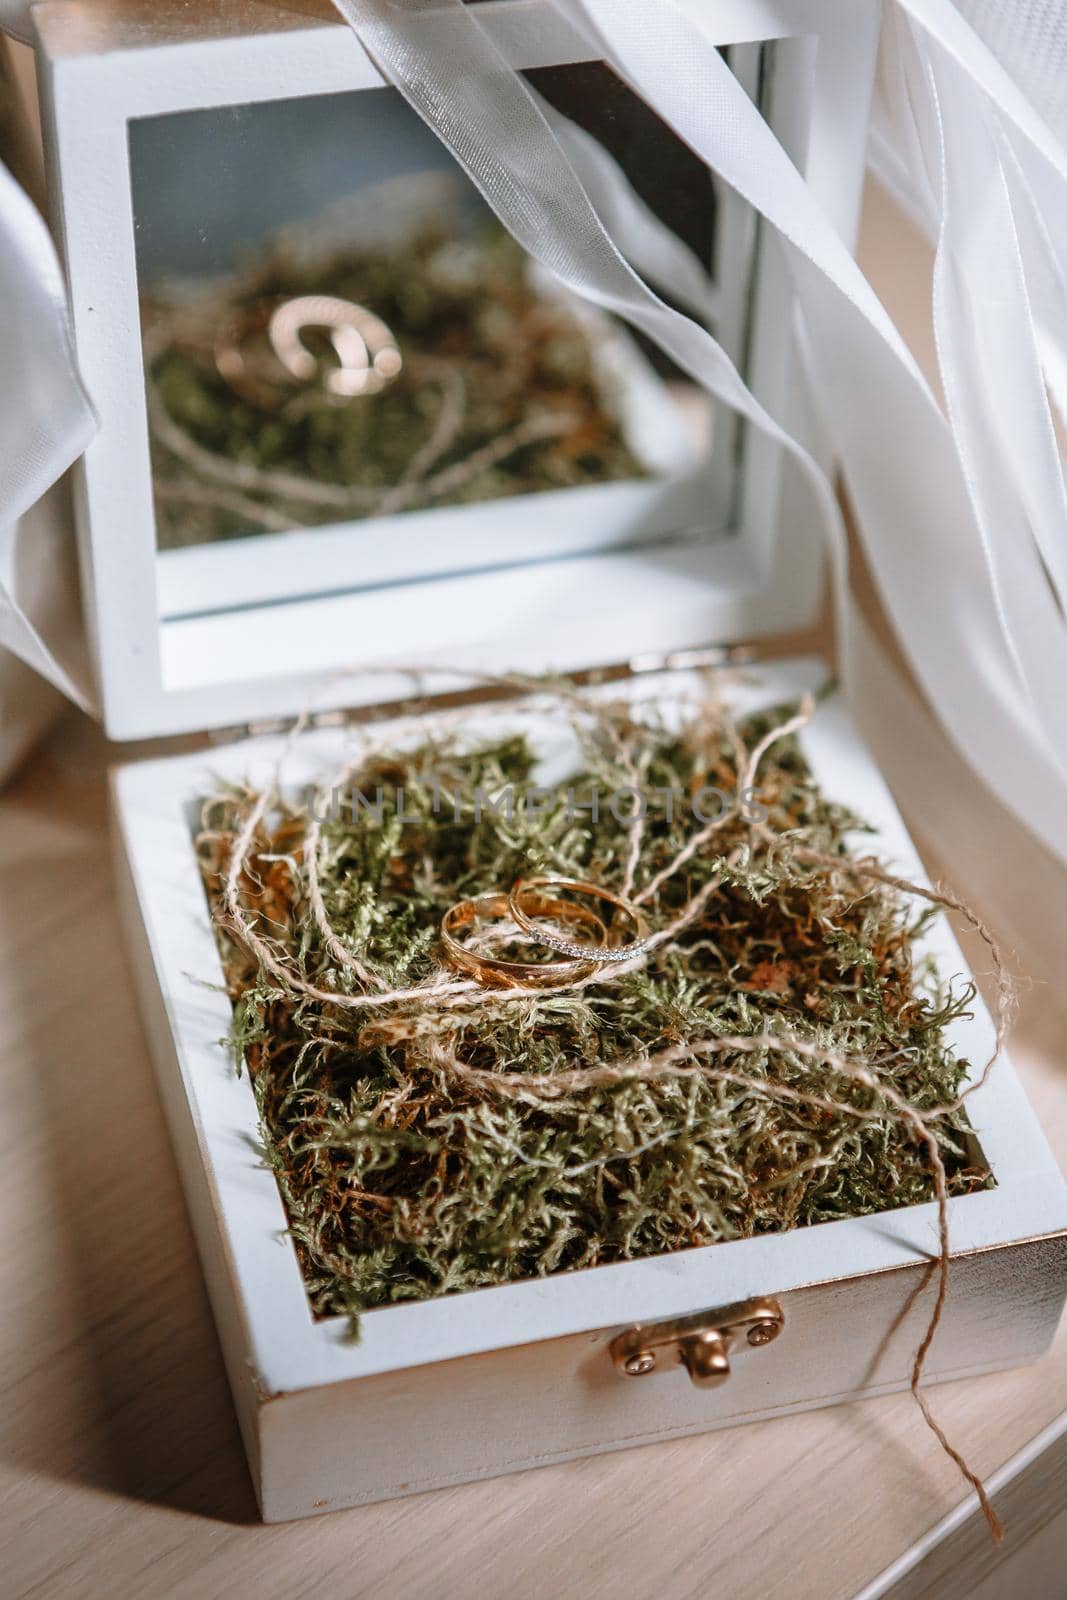 Gold wedding rings lying in a handmade white wooden box